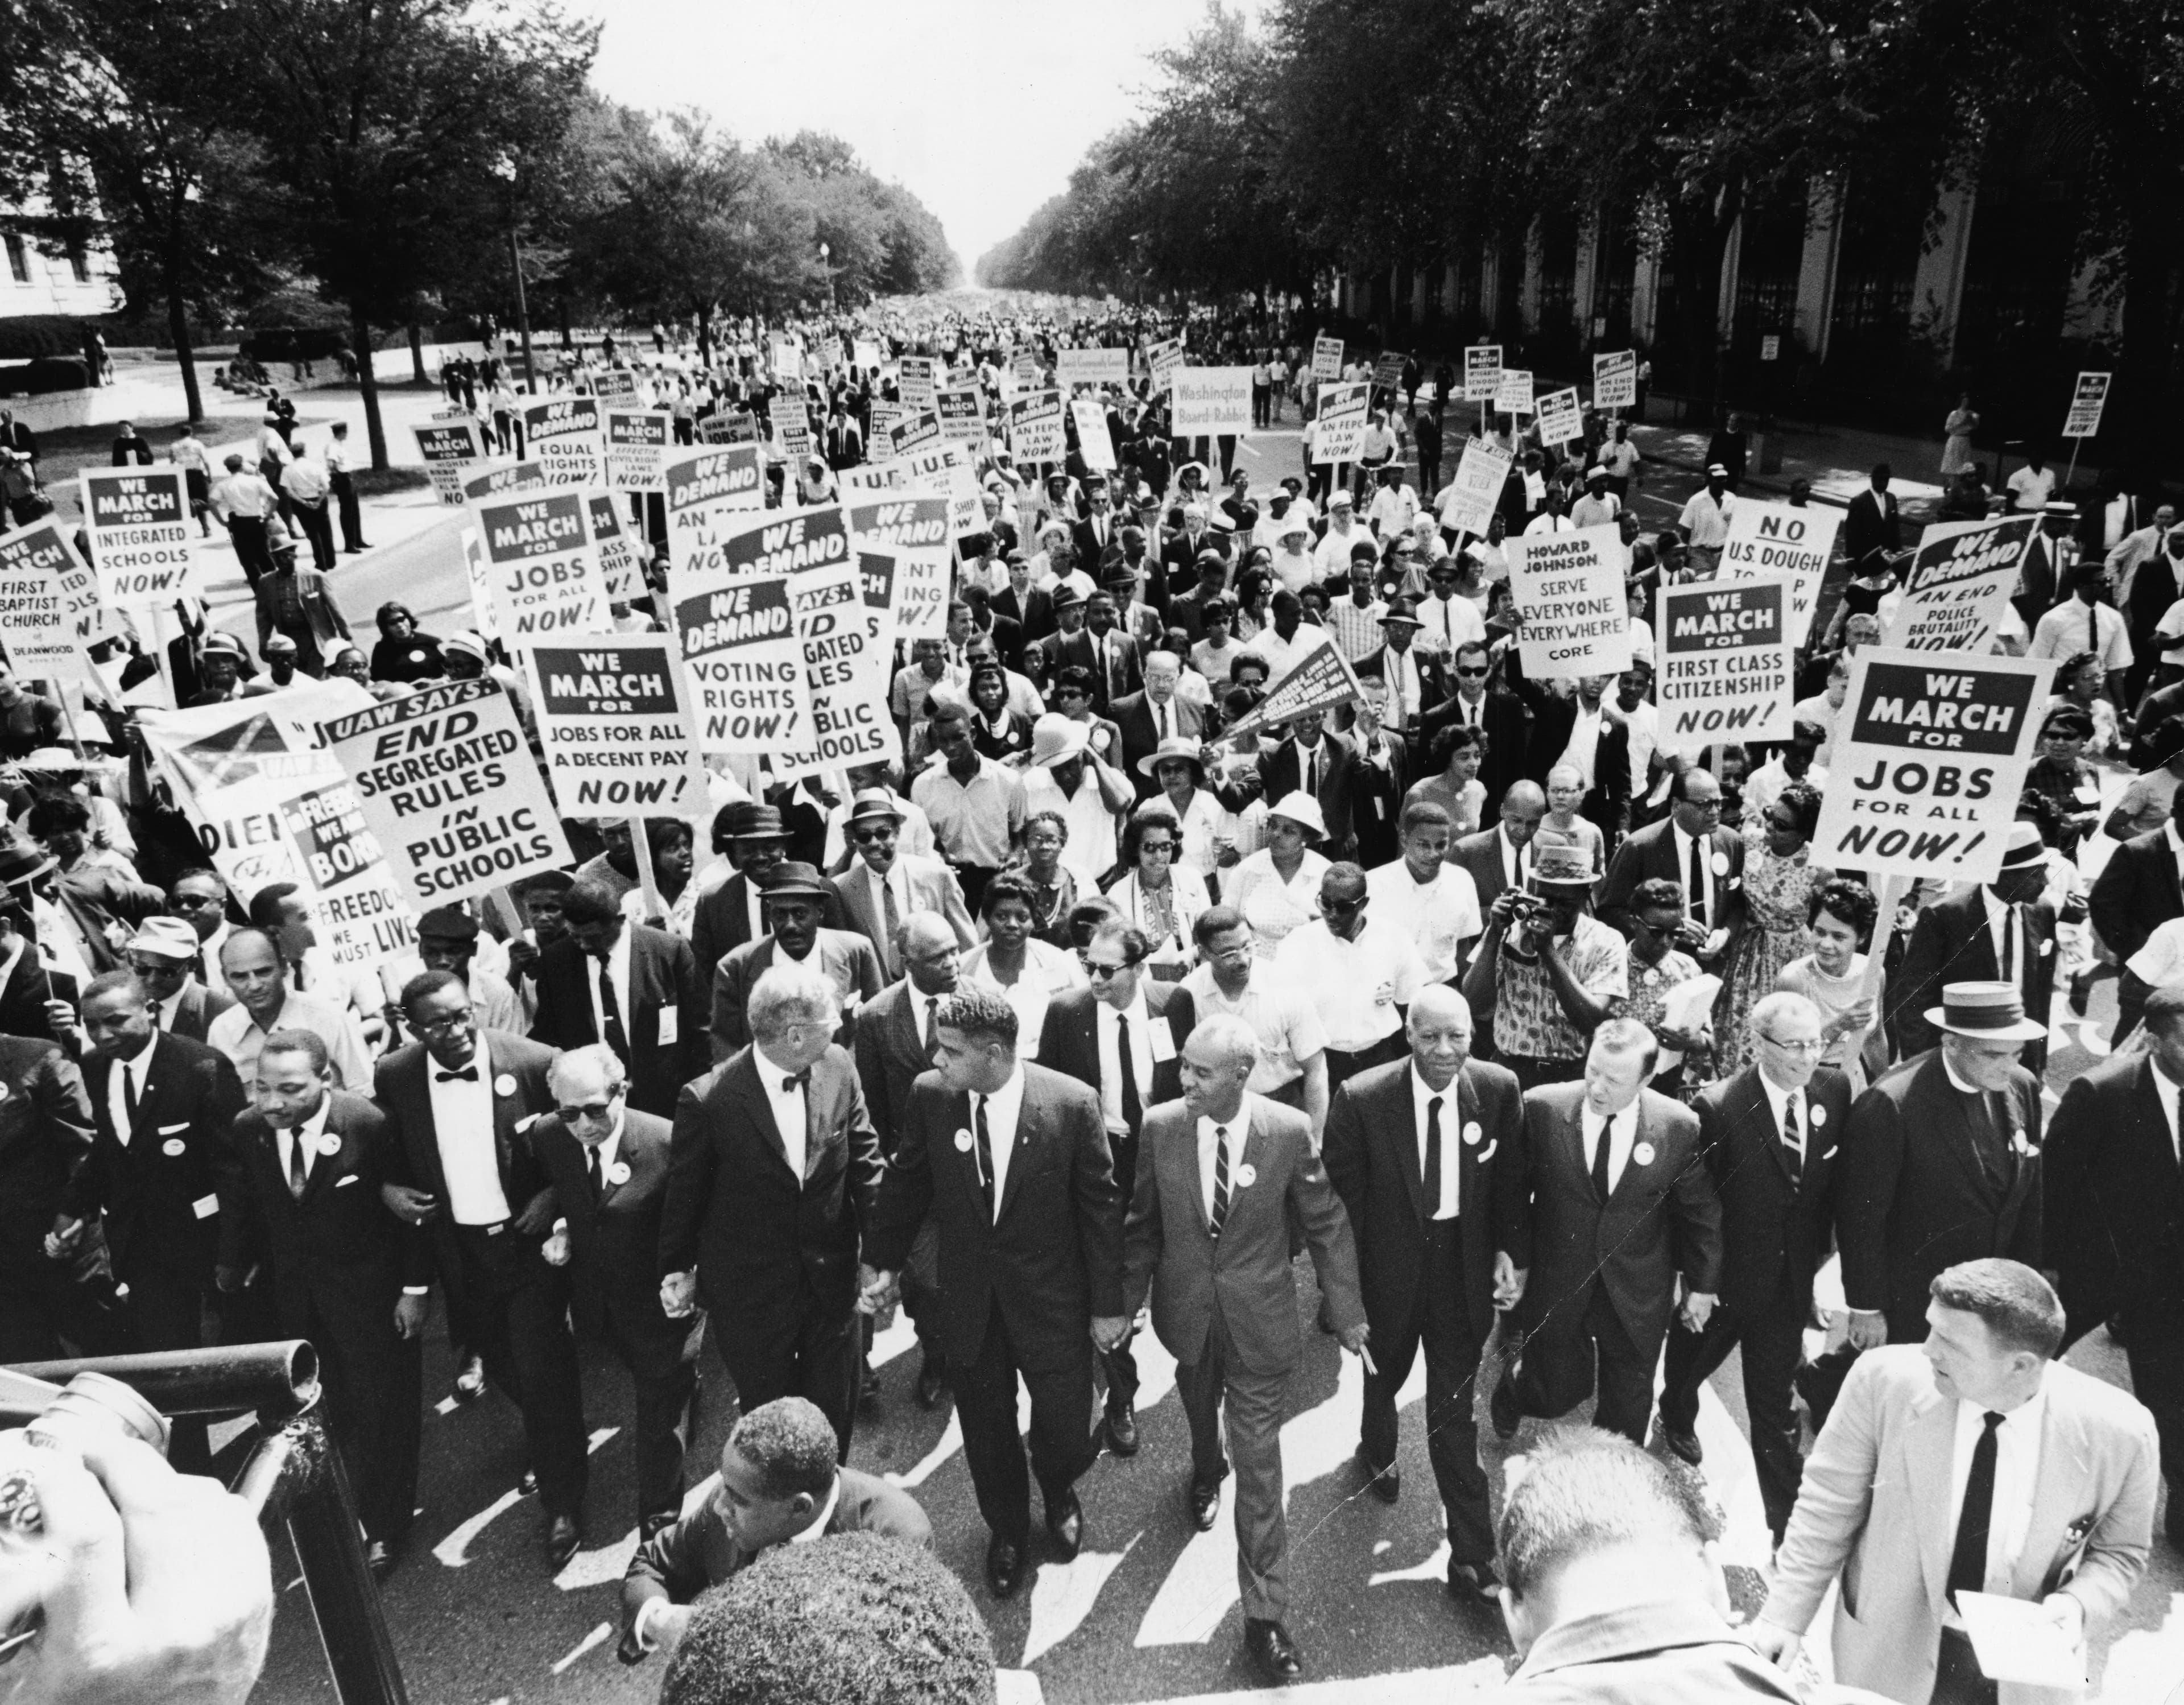 The Vision of Martin Luther King Jr.: Love and Justice for All